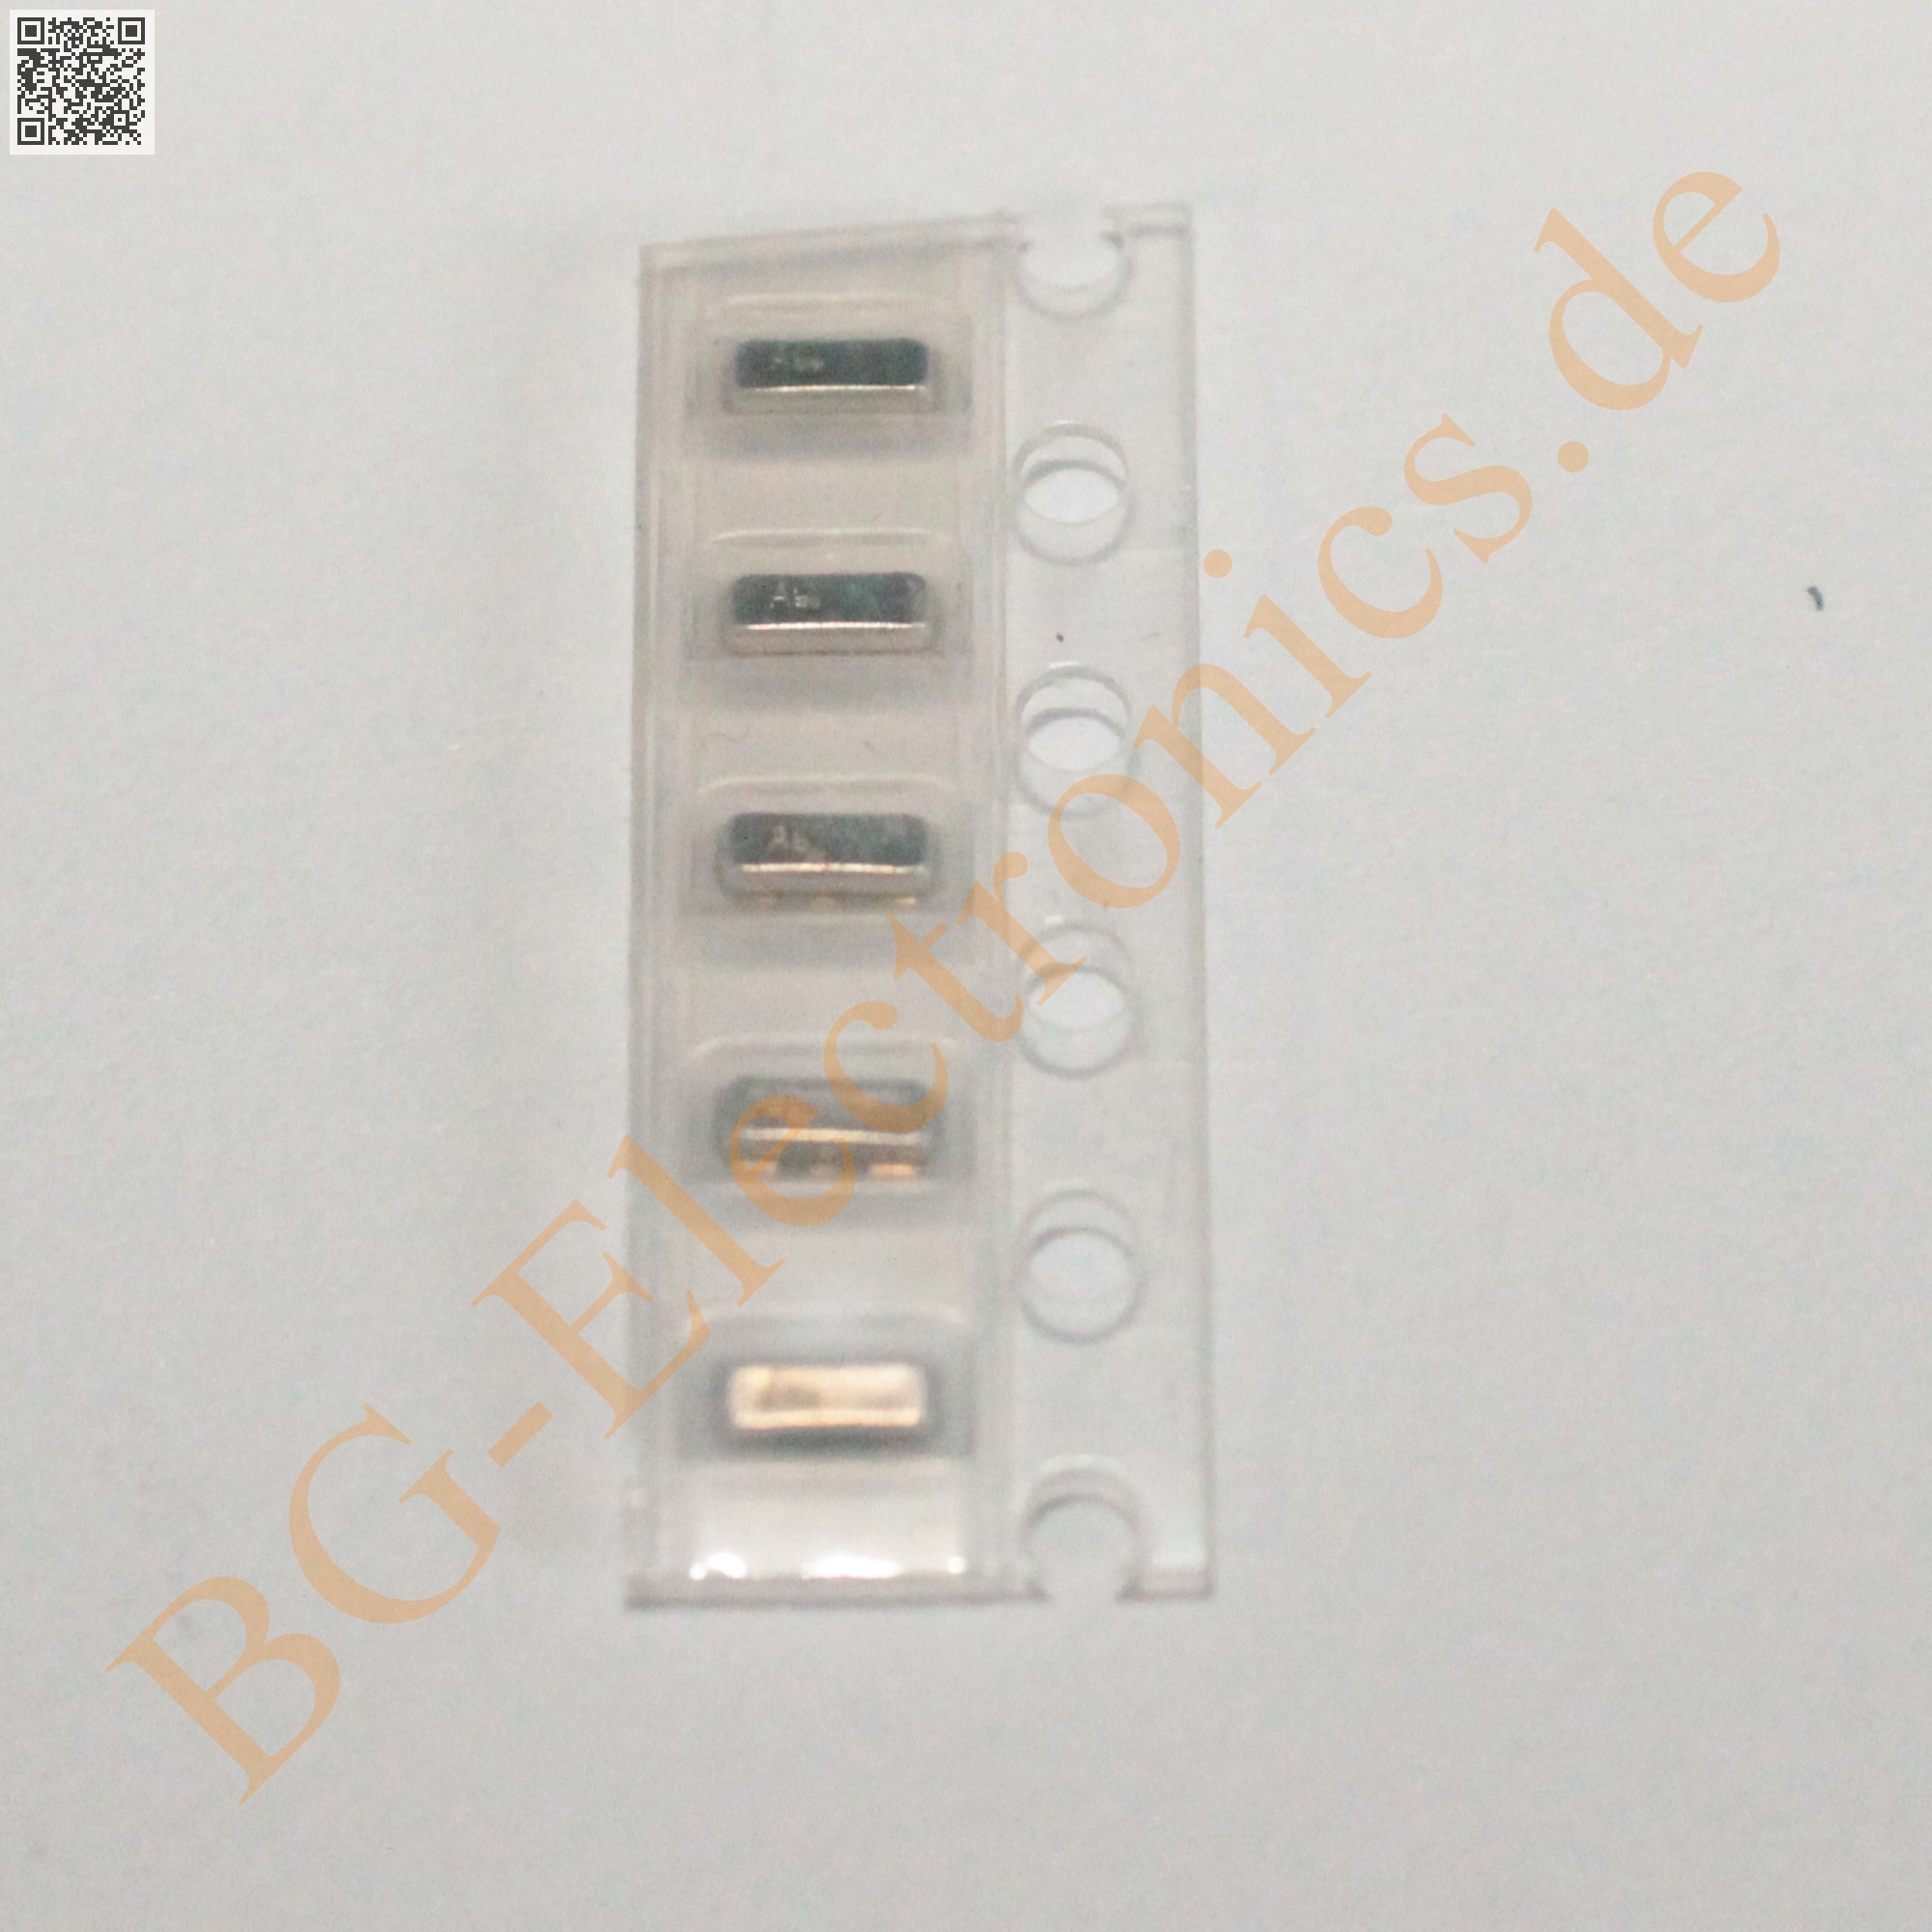 CSTCE 16 MHz Resonator SMD